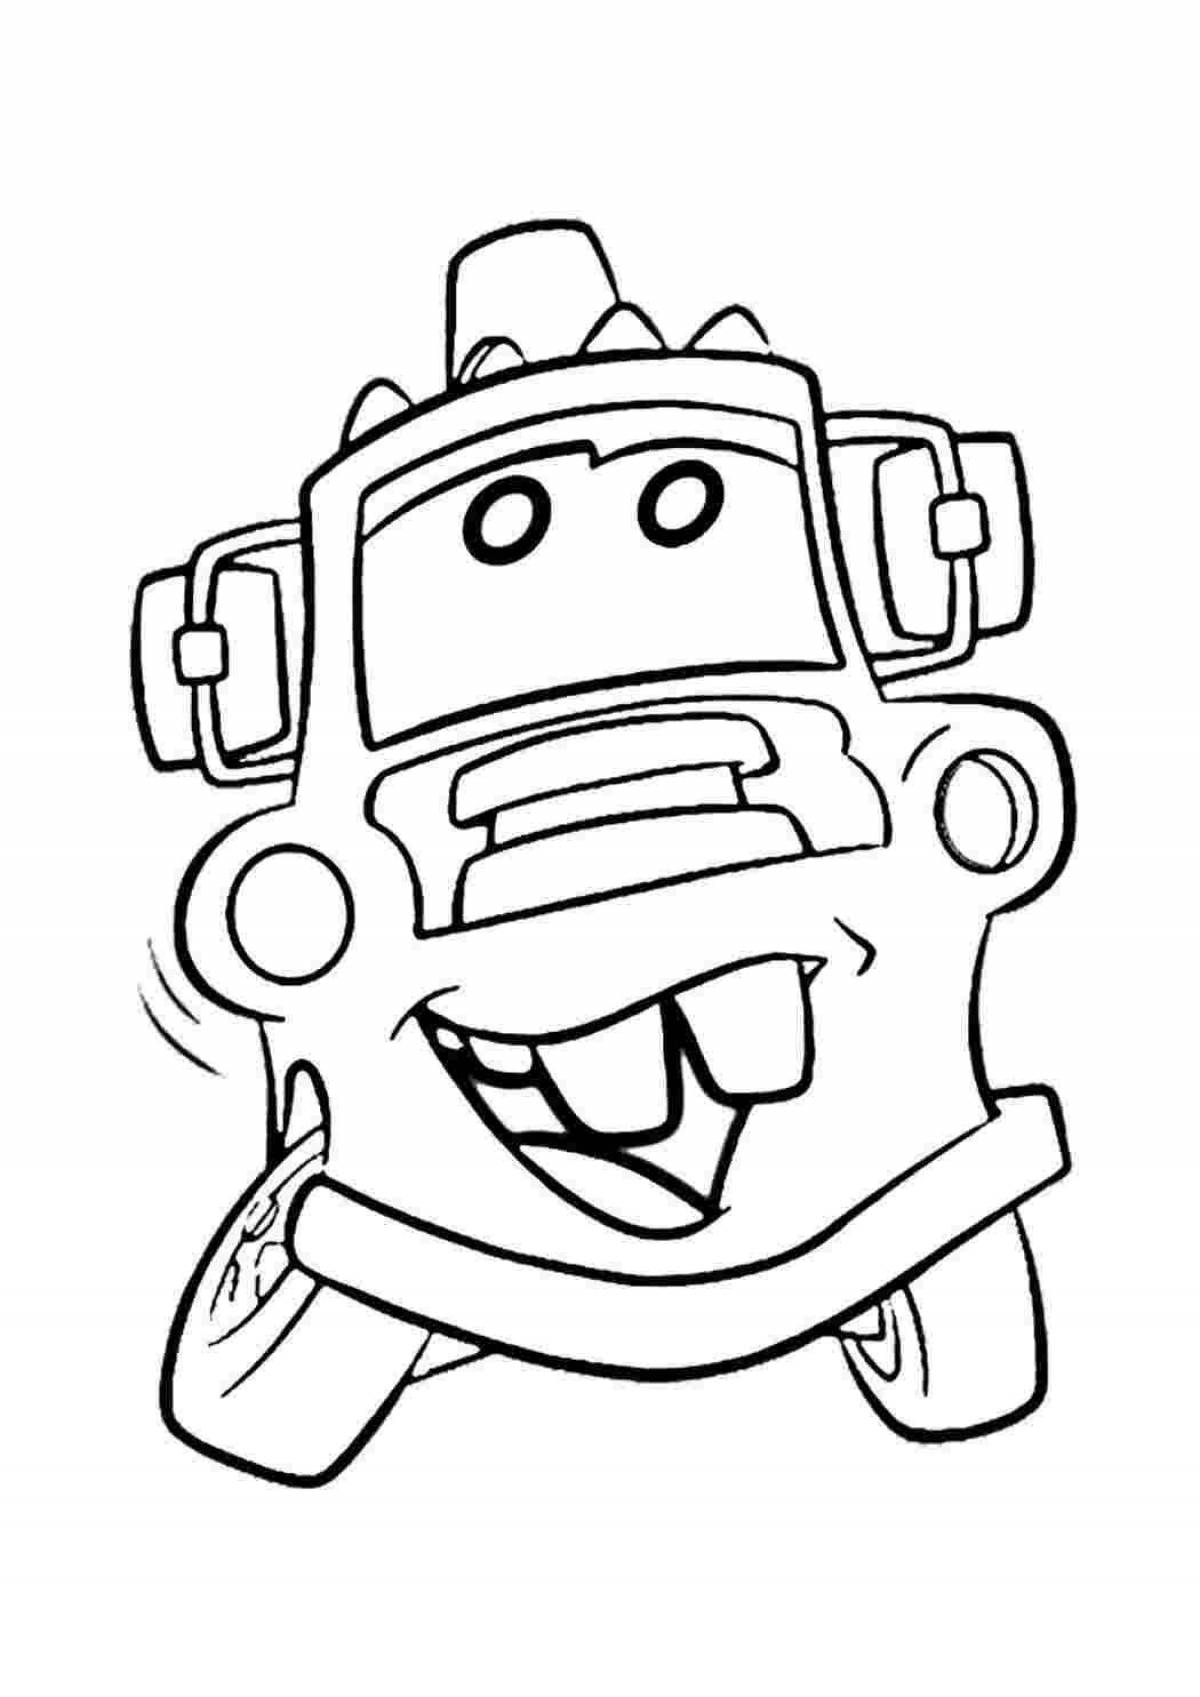 Finley marvelous fire truck coloring page